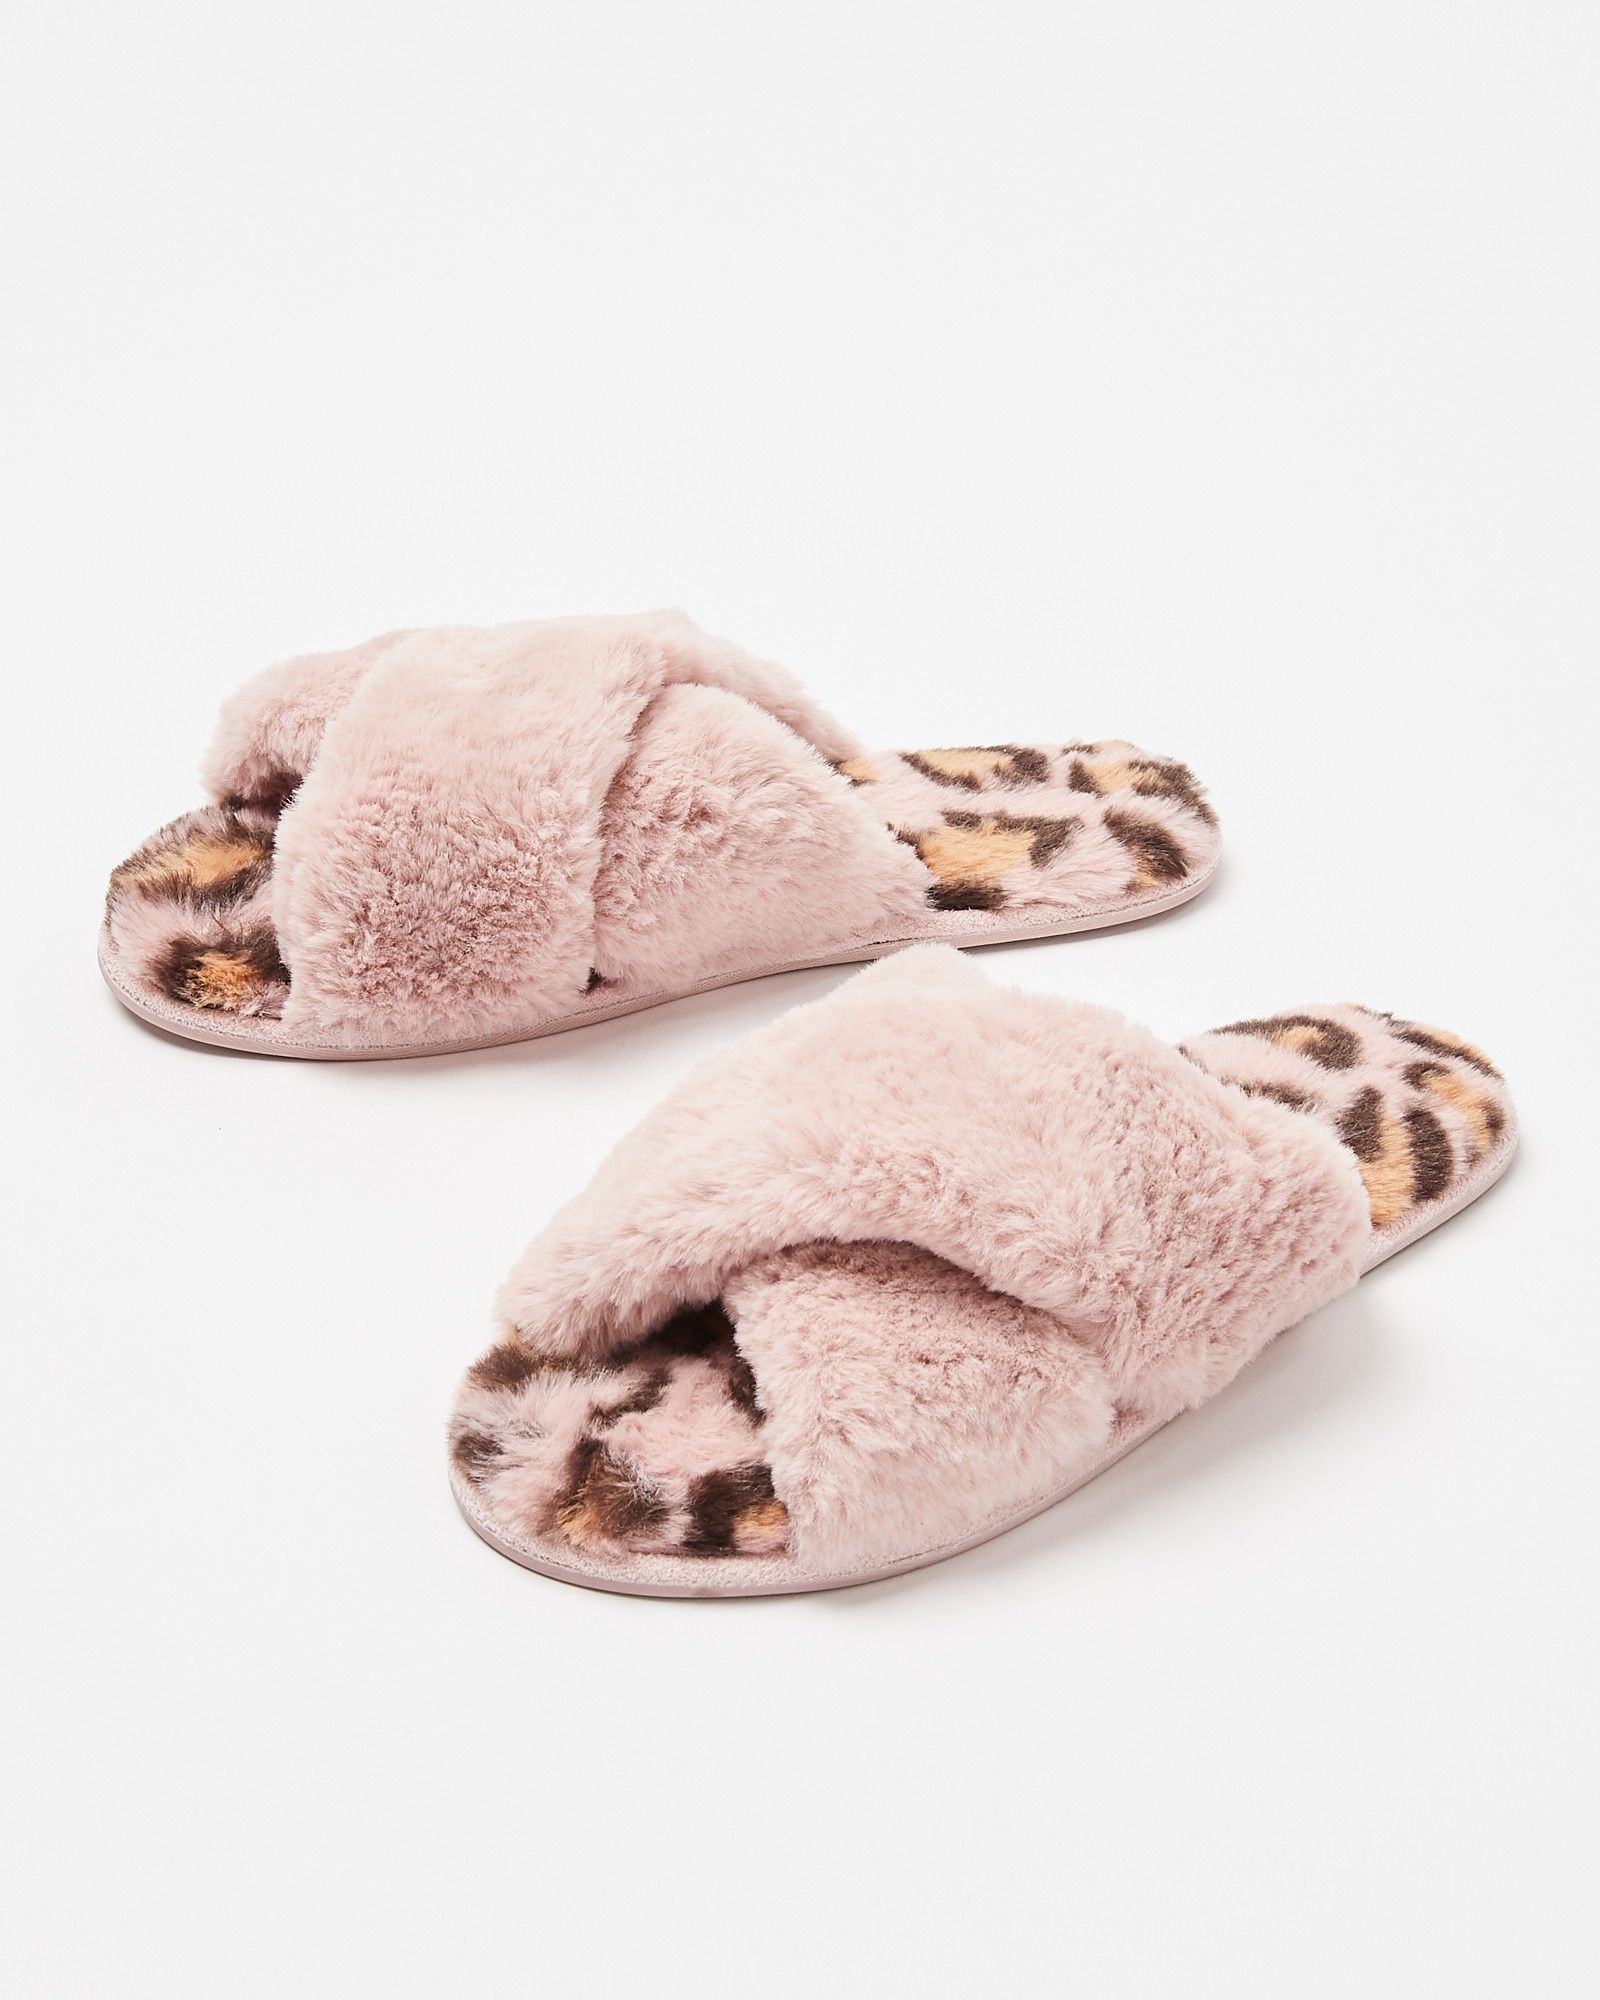 leopard print fluffy slippers